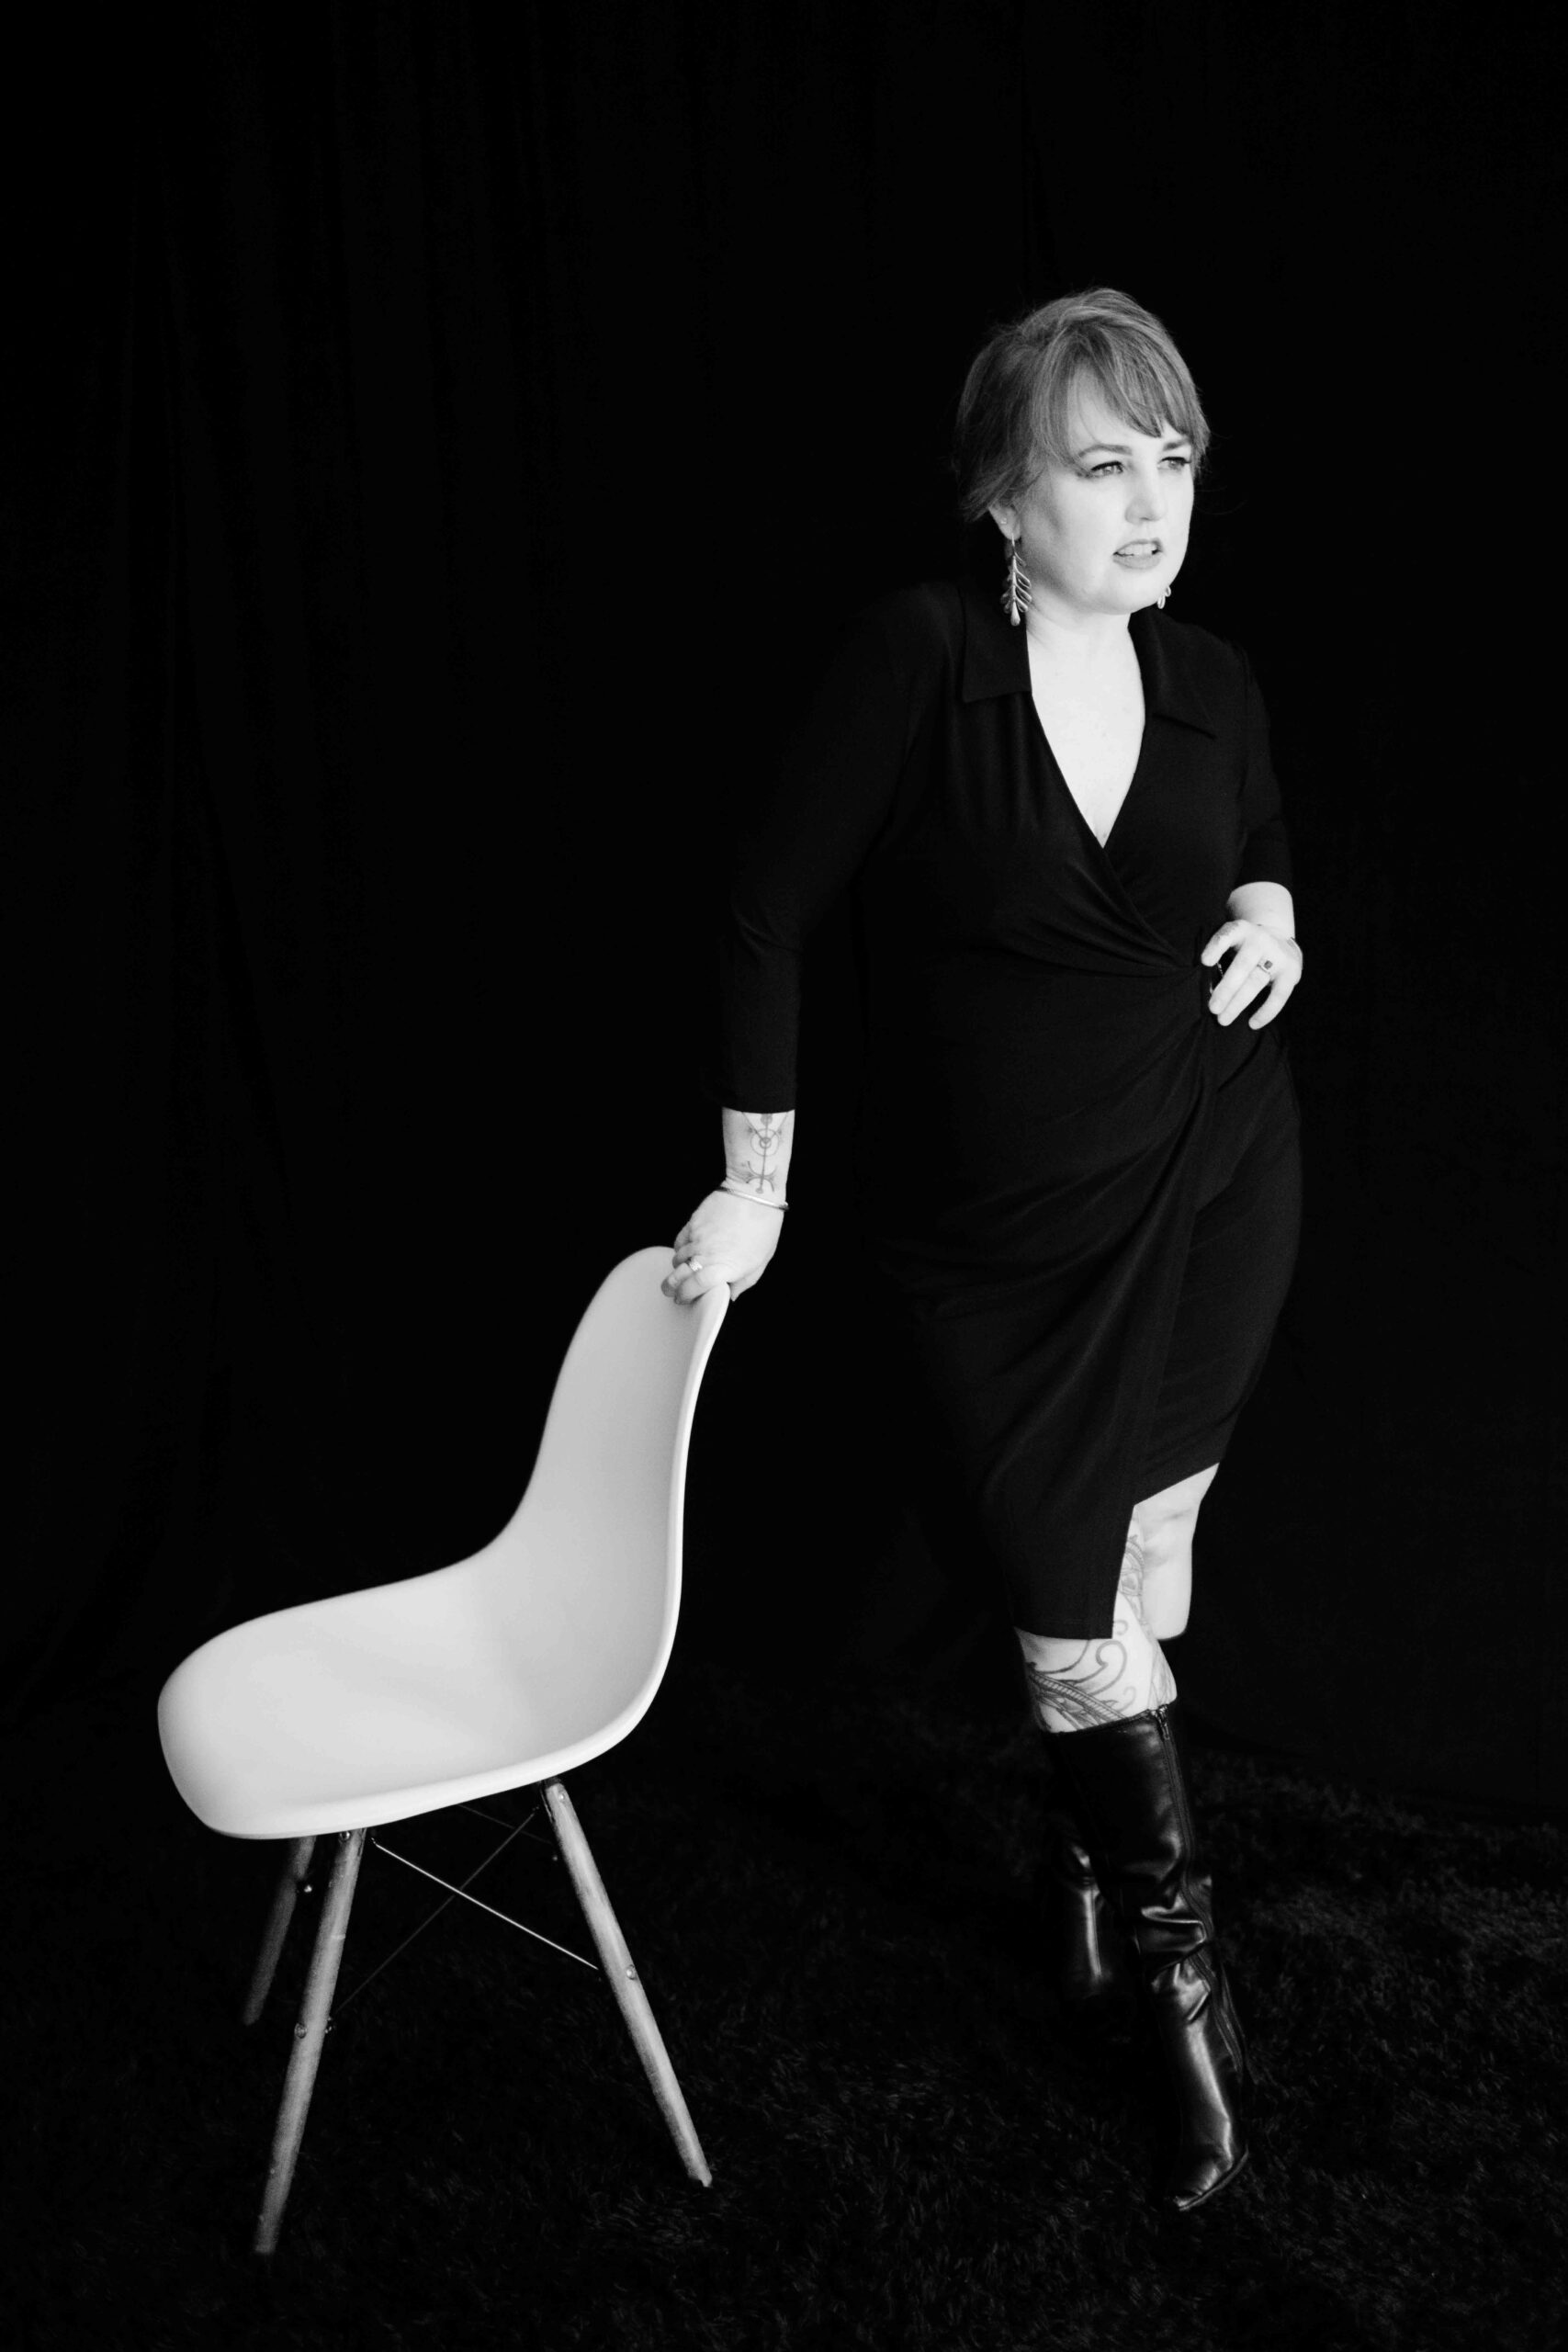 Black and white photo of a woman in black dress. She's standing beside a chair and her hand is resting on the chair